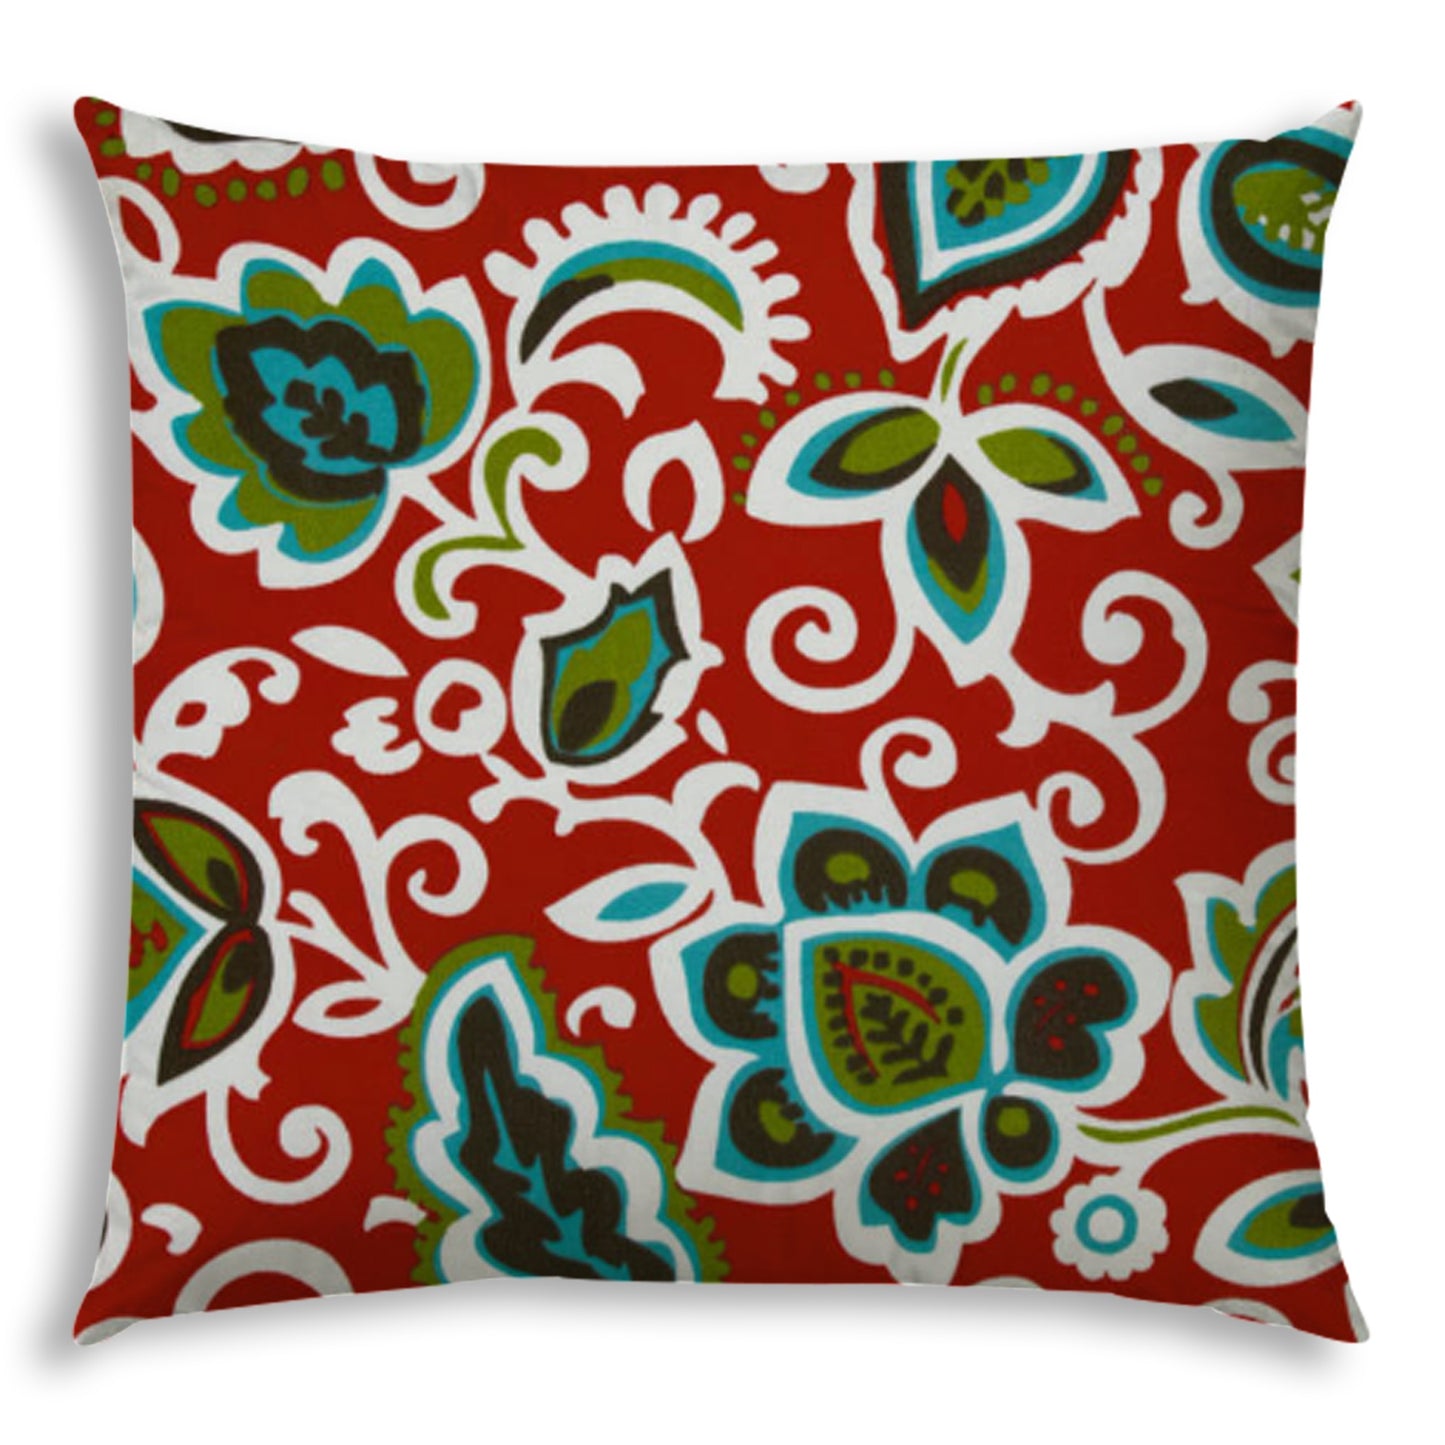 20" X 20" Read And Green Blown Seam Damask Throw Indoor Outdoor Pillow